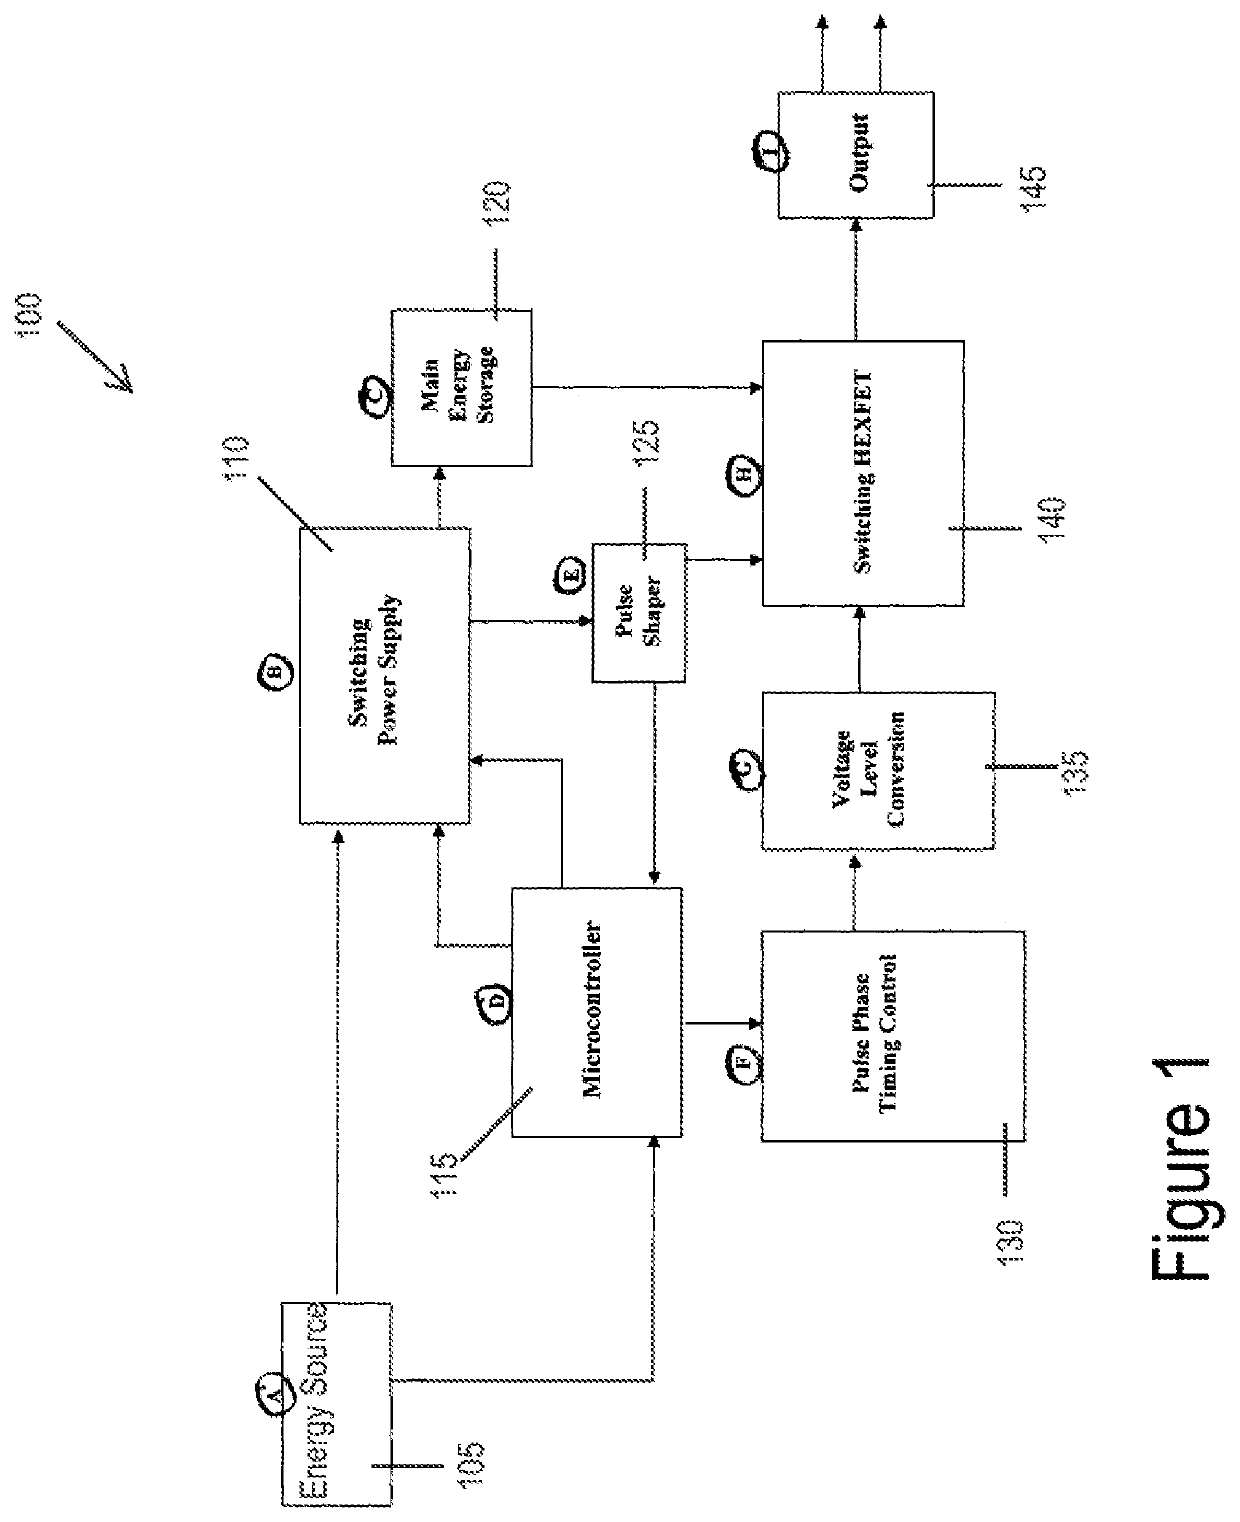 Apparatus and method for treatment of mental and behavioral conditions and disorders with electromagnetic fields